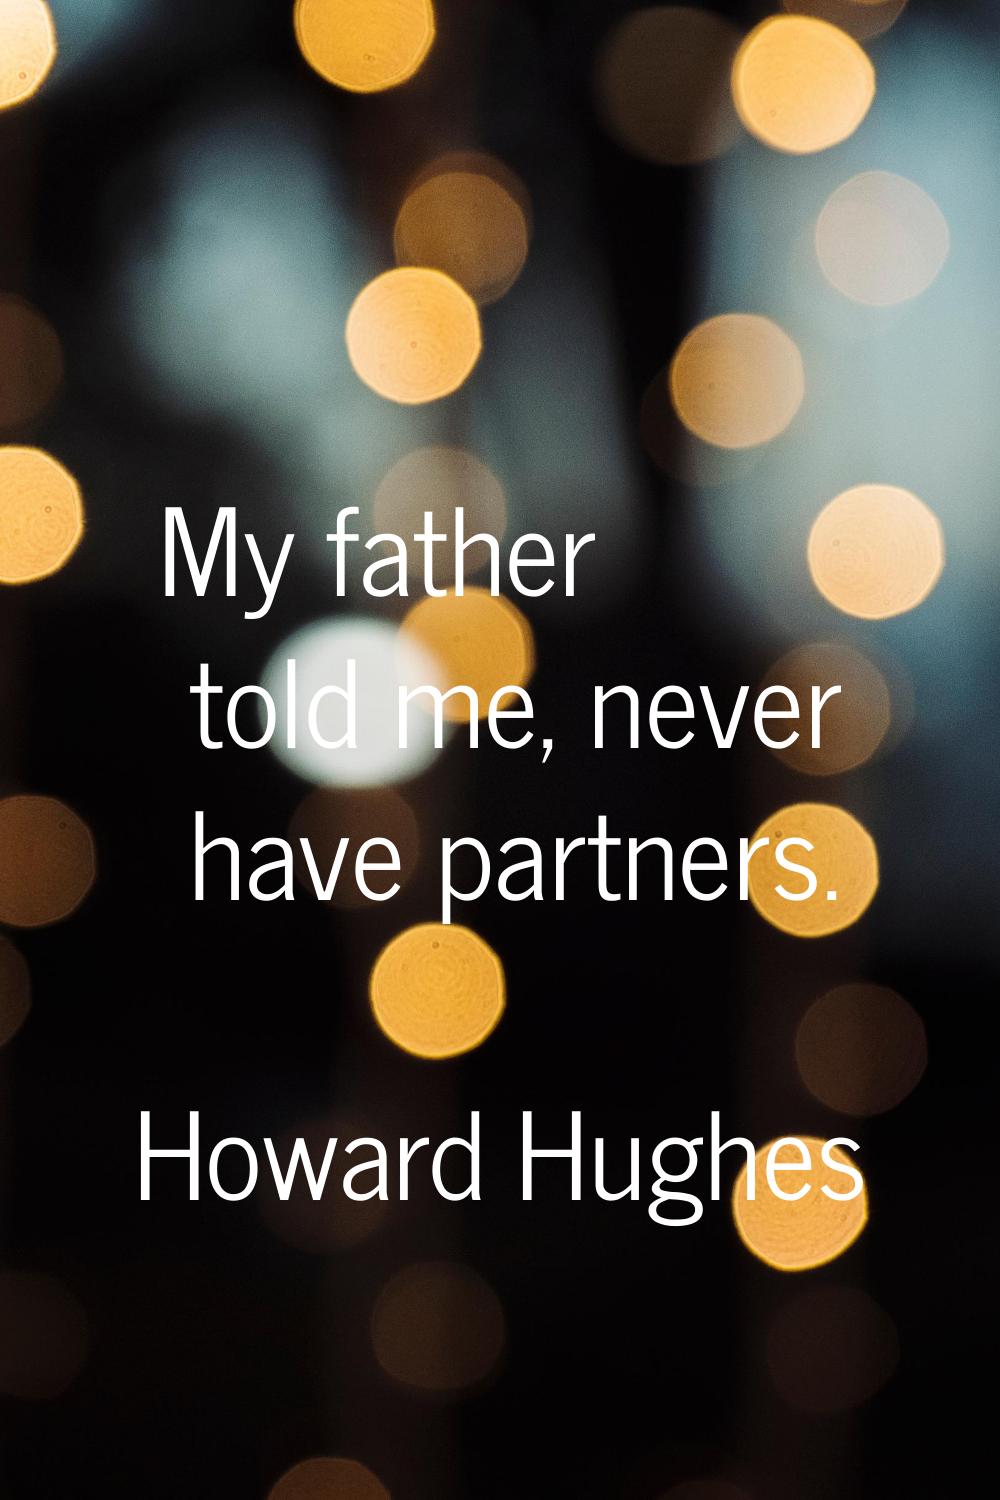 My father told me, never have partners.